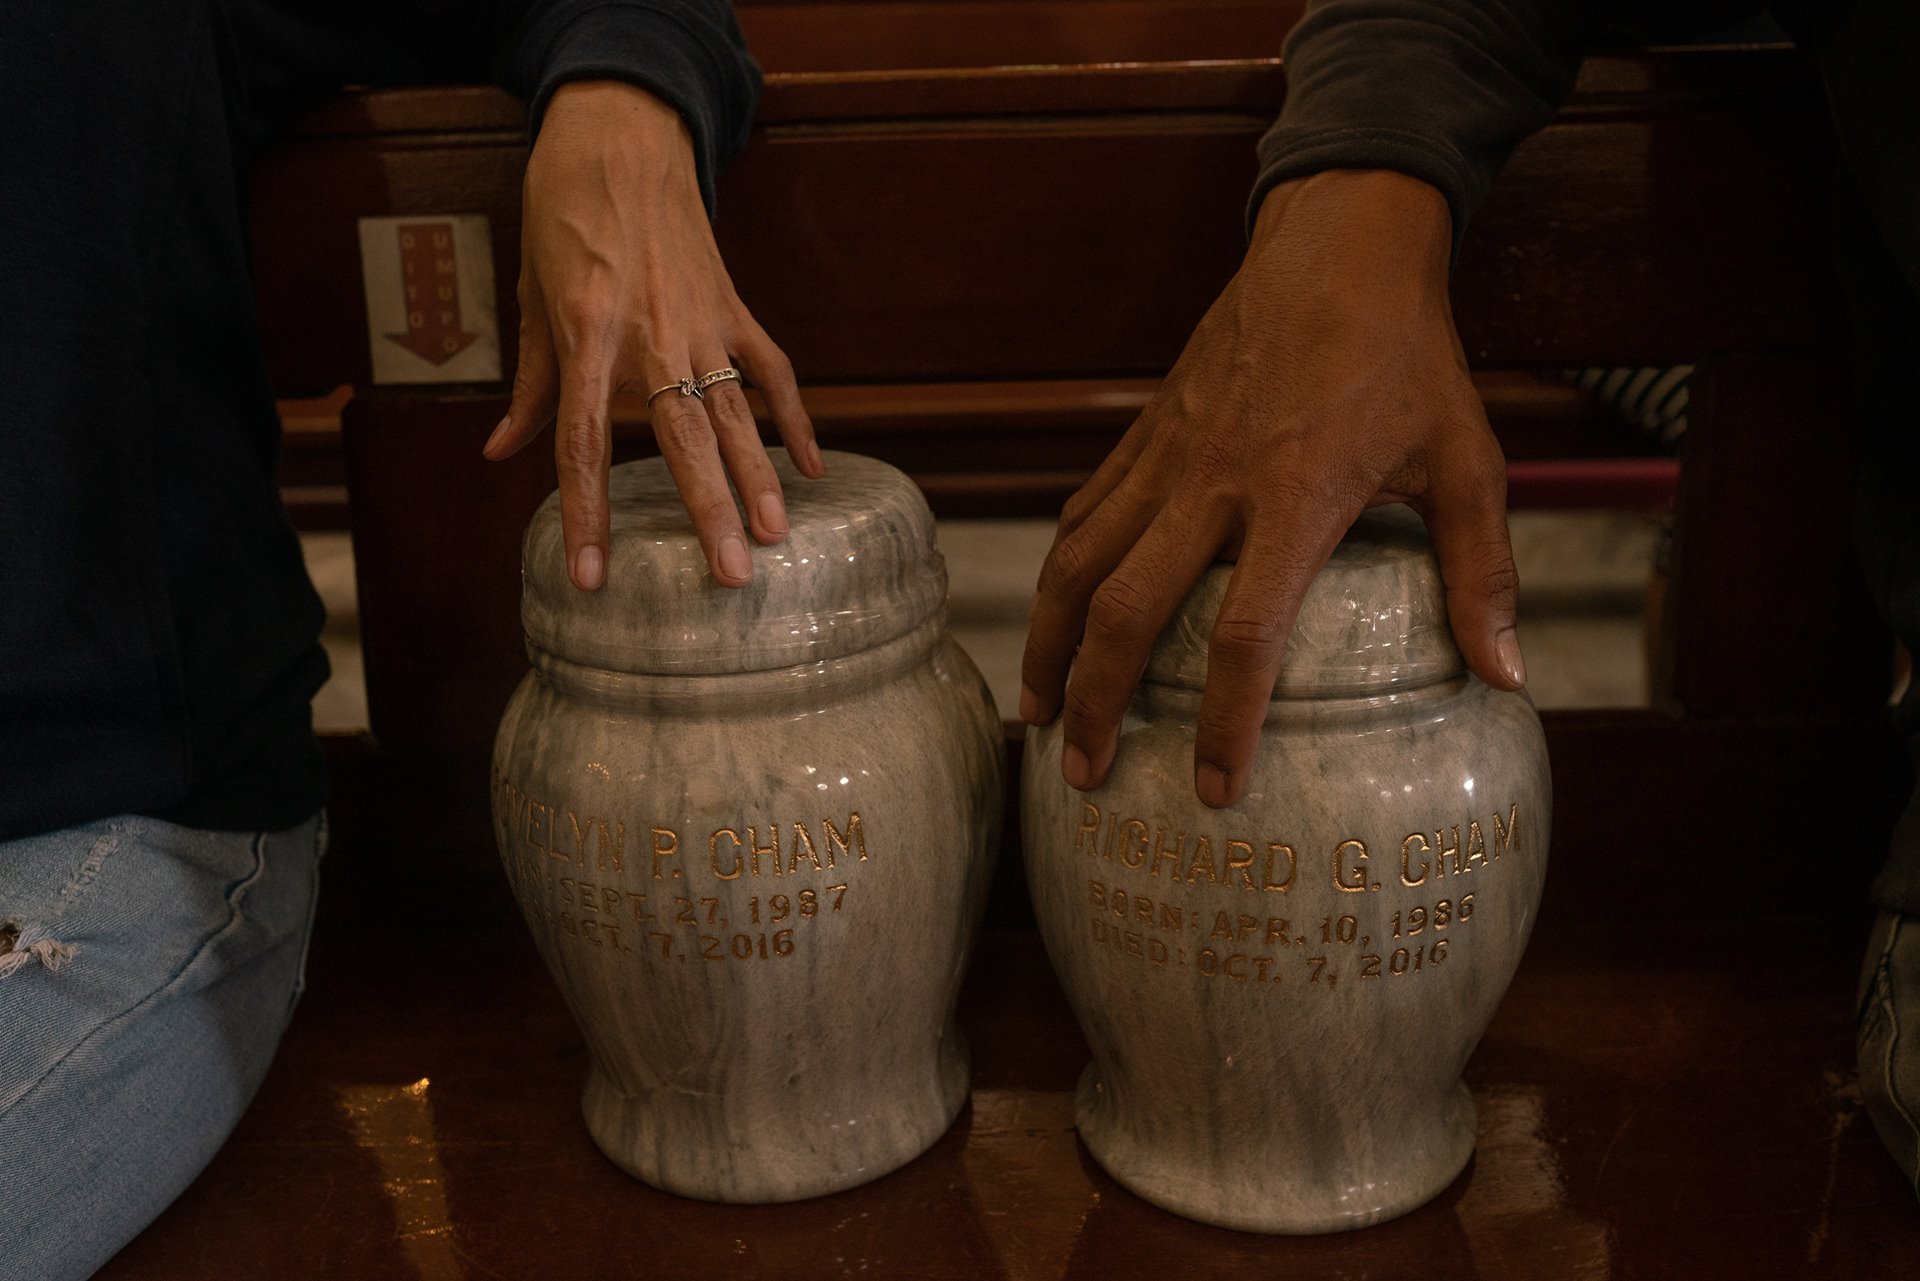 <p>The family of Rovelyn and Richard Cham receive the urns containing their ashes, in Tayuman, Manila, the Philippines. Unknown gunmen killed the couple at home in 2016.</p>
